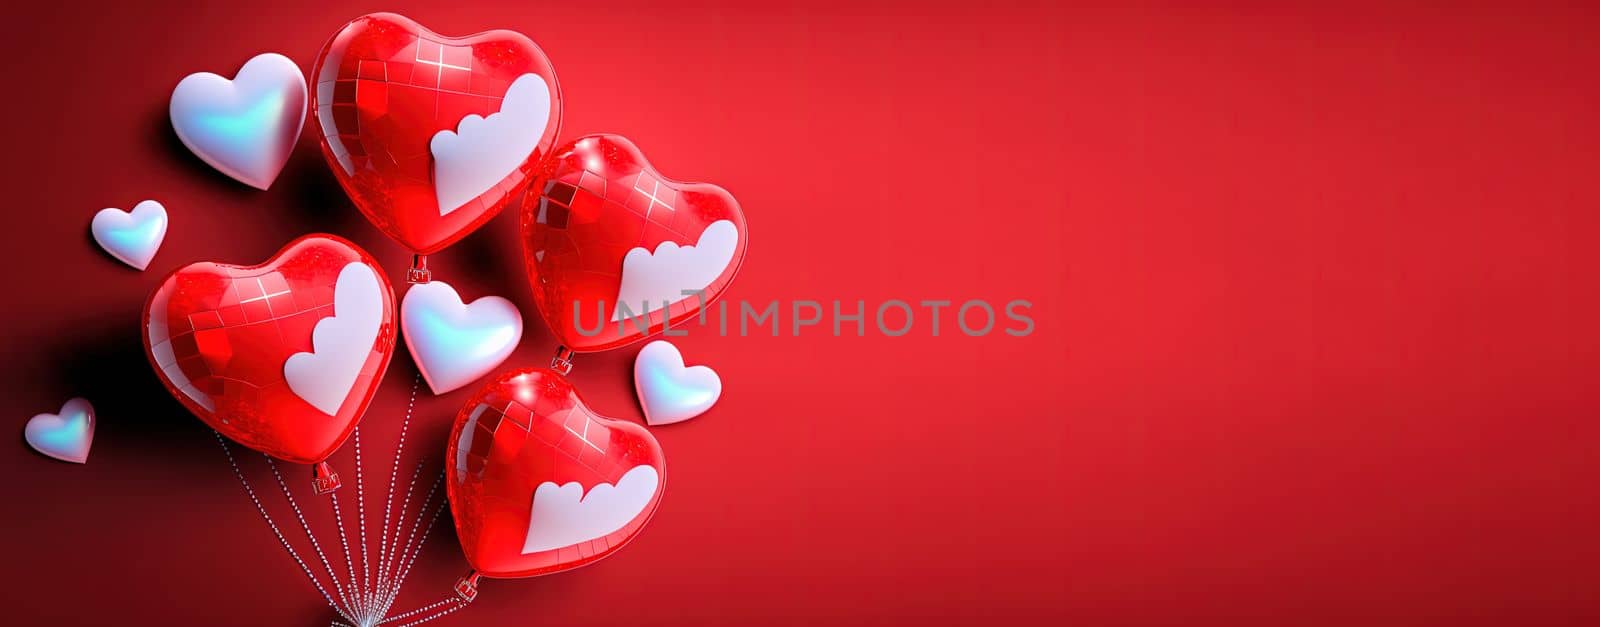 Bright red 3D heart shape on a happy Valentine's Day banner background by templator